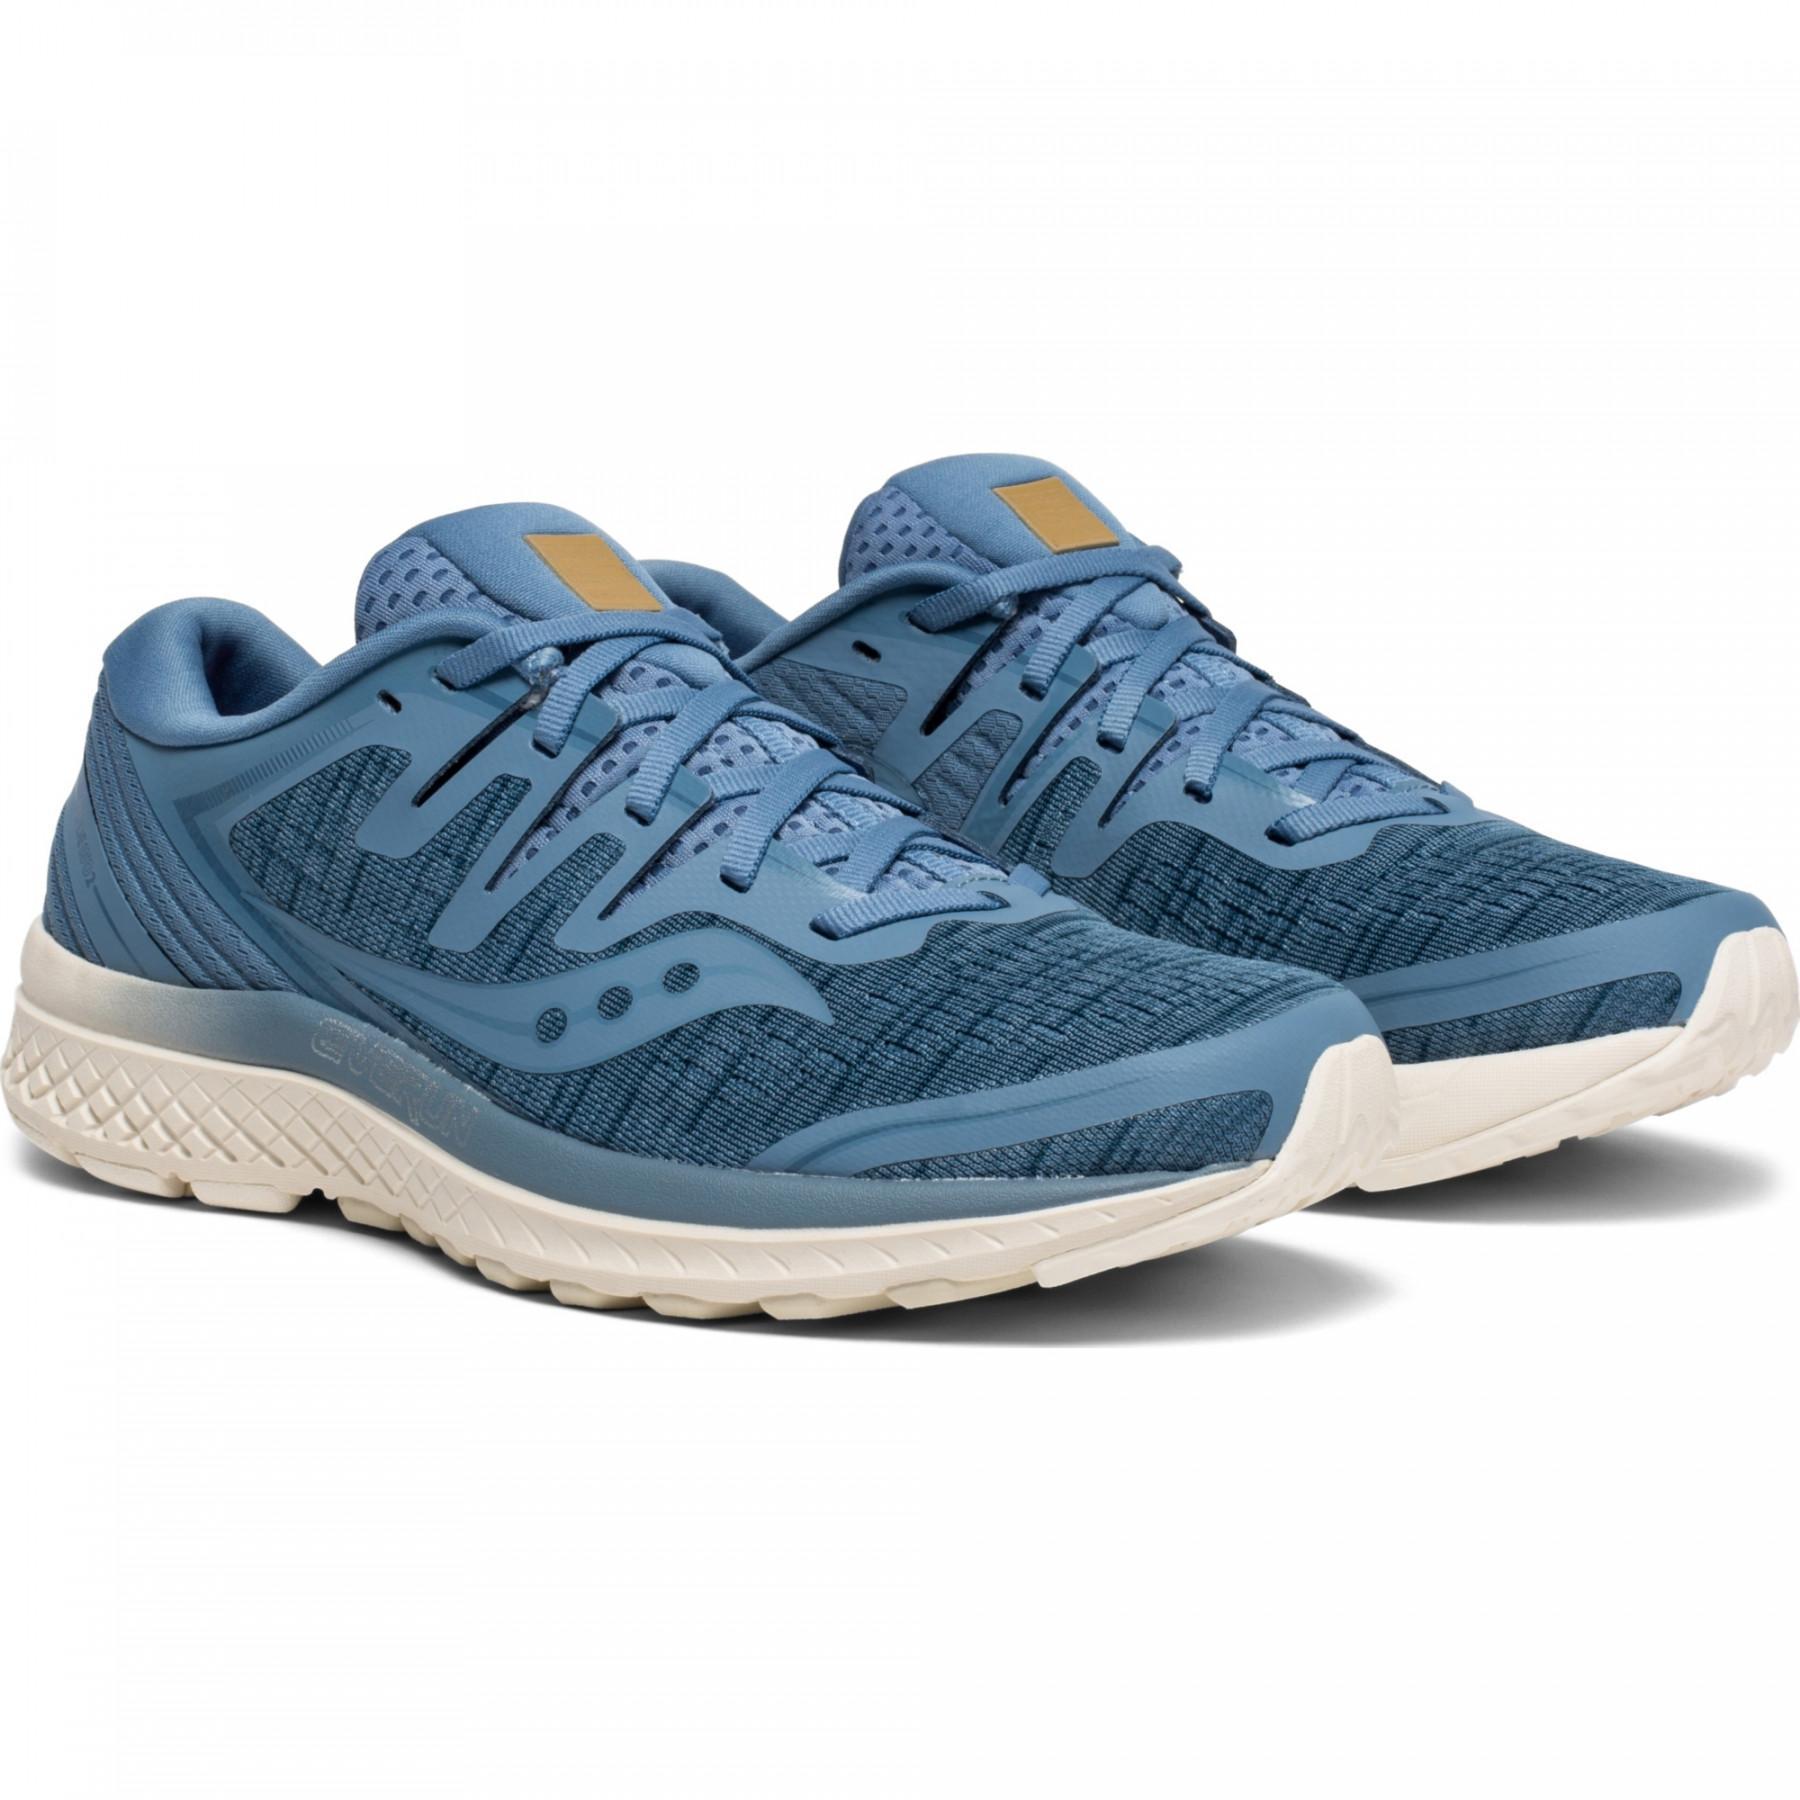 Women's shoes Saucony Guide ISO 2